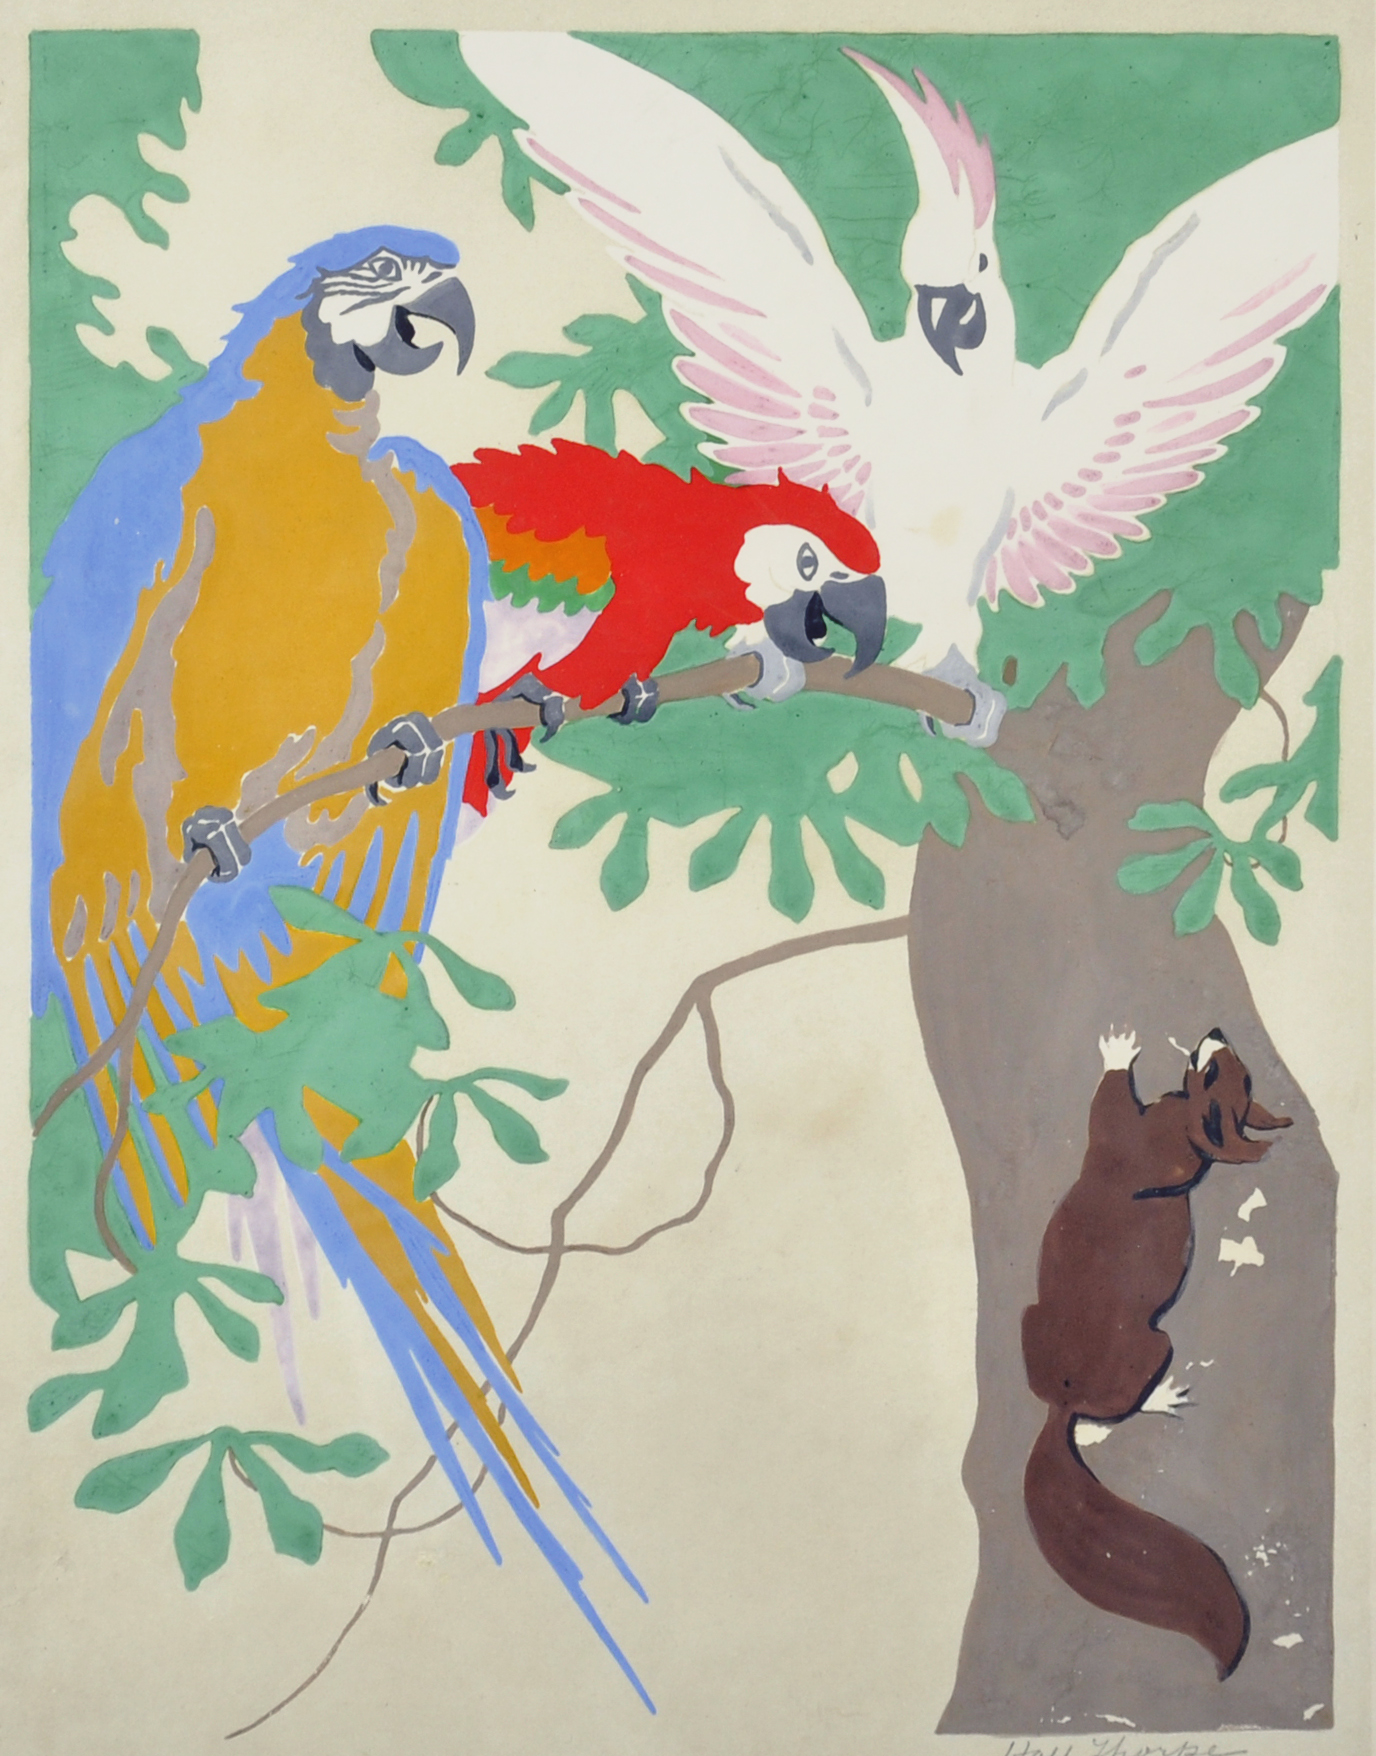 John Hall Thorpe (1874-1947) Australian. "Parrots", with Two Parrots, a Cockatoo and a Squirrel, a